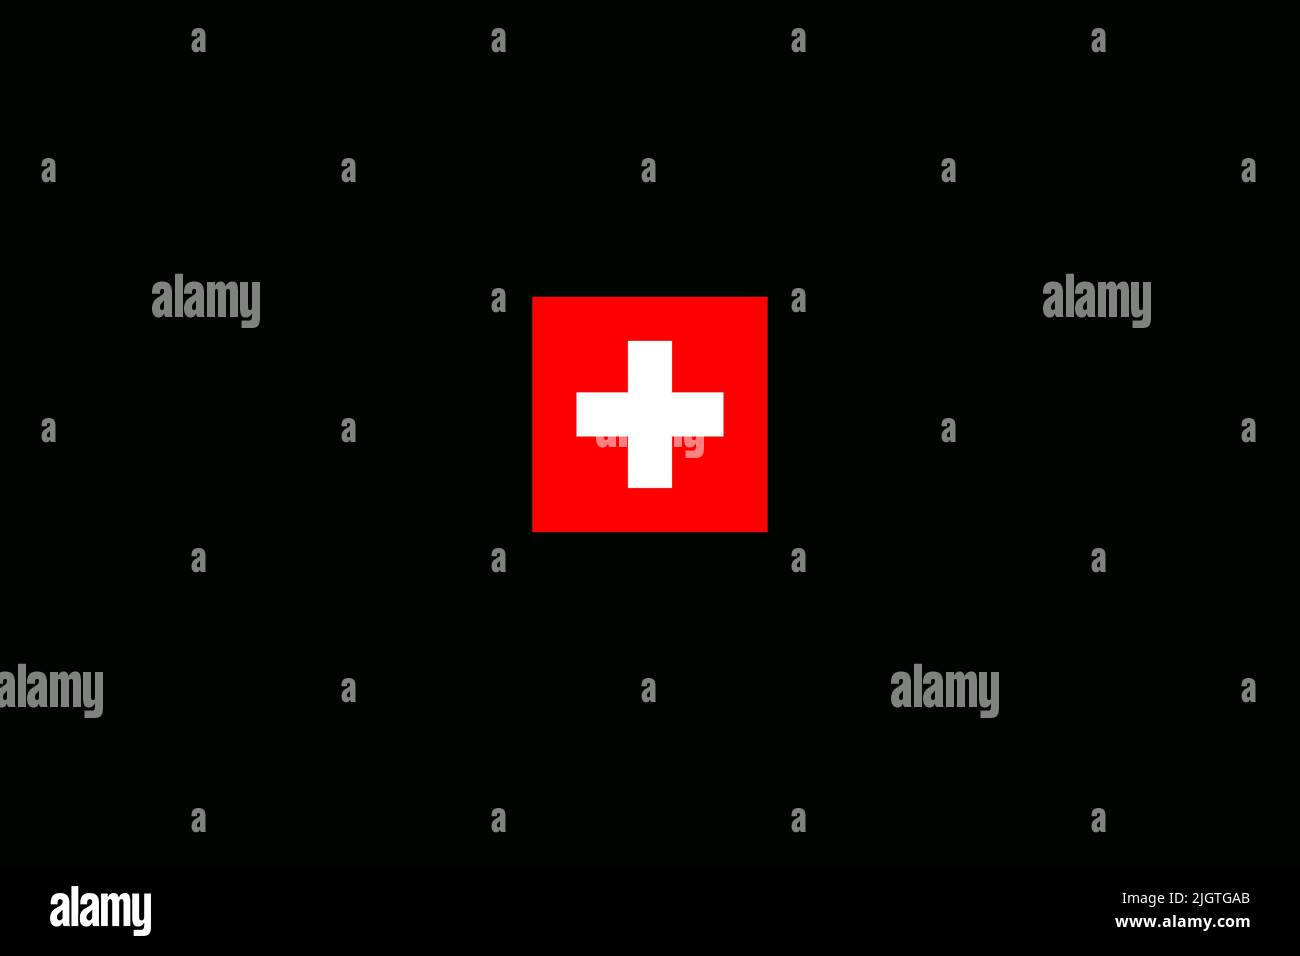 Switzerland national day. Founding of the Swiss Confederation on 1st of August. Swiss flag background. Stock Photo